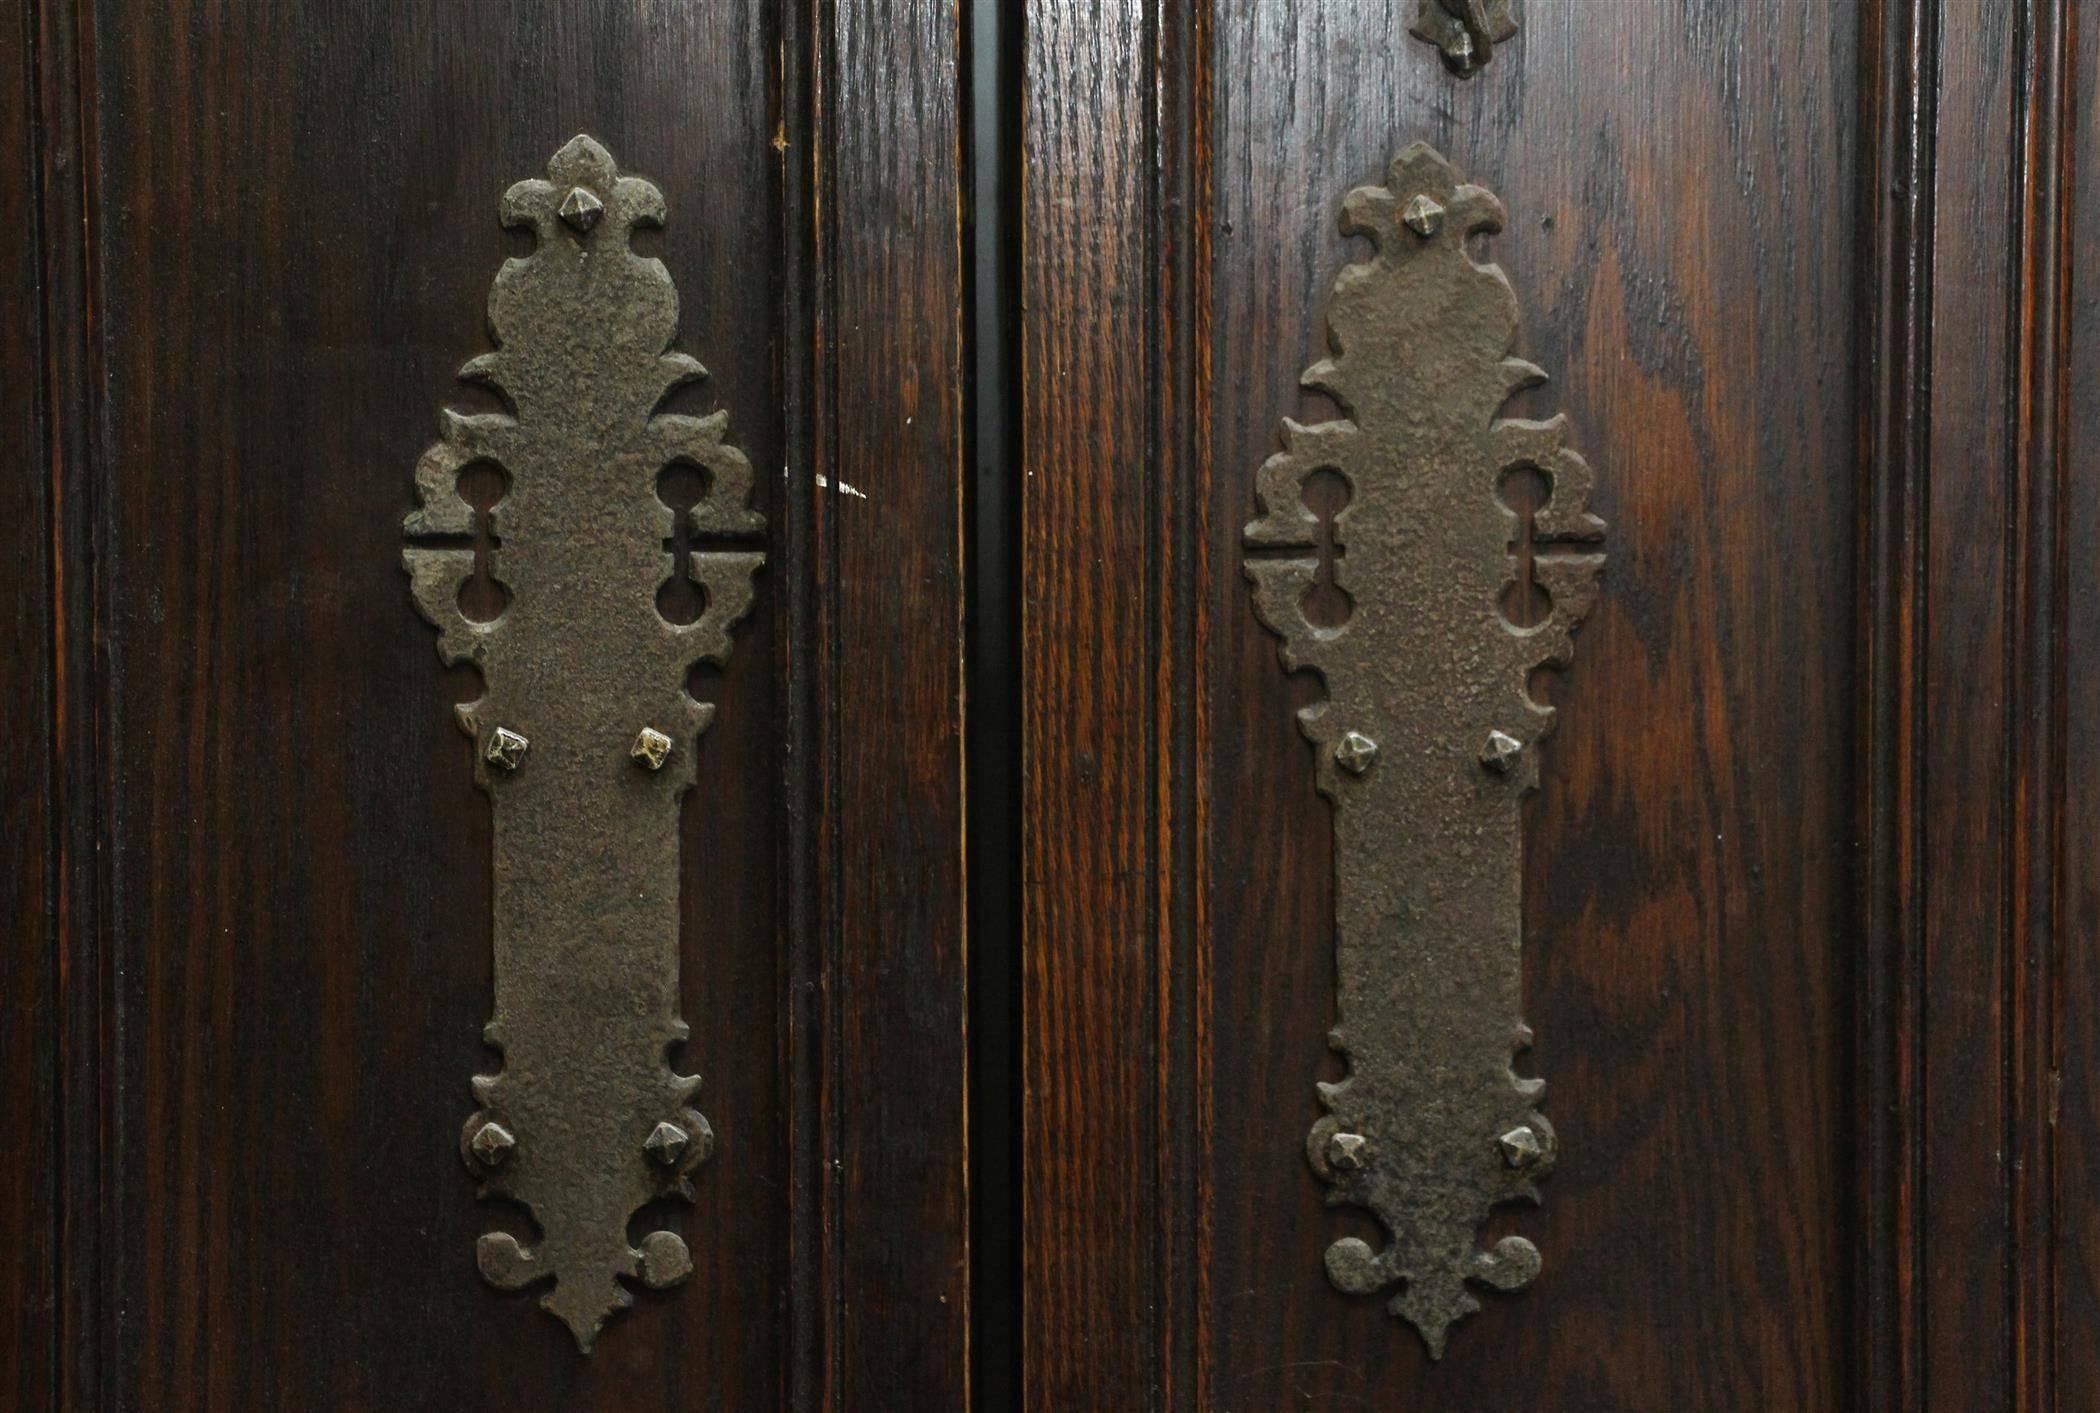 1920s oak double entry doors with a Gothic arch, original leaded glass windows and hardware. The opposite side has fantastic studded details. Good condition. Priced as a pair. Please inquire about a photo complete with transom. This can be seen at